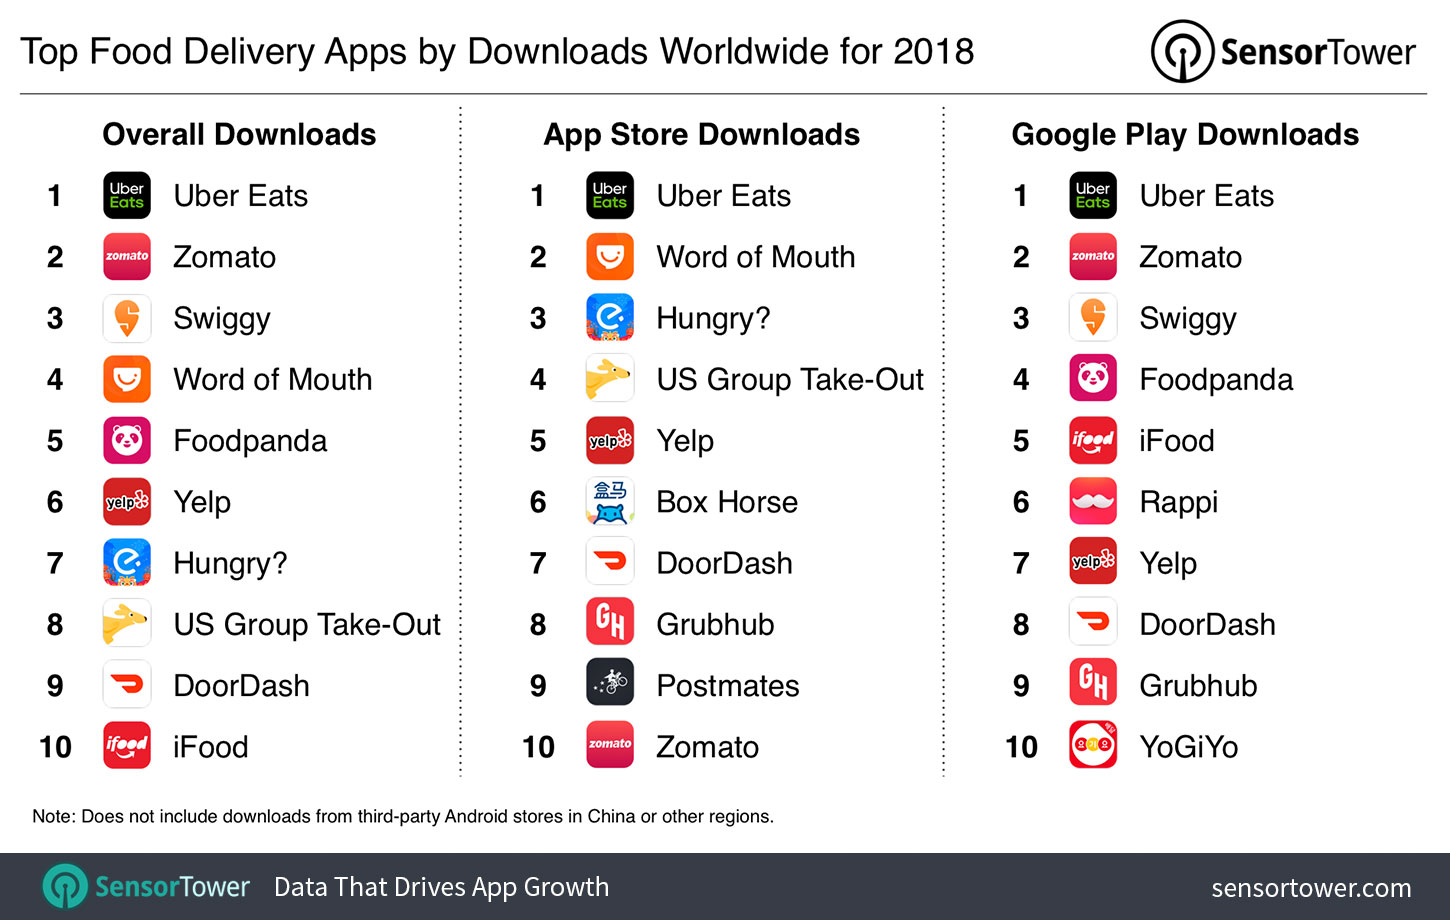 Top Food Delivery Apps Worldwide for 2018